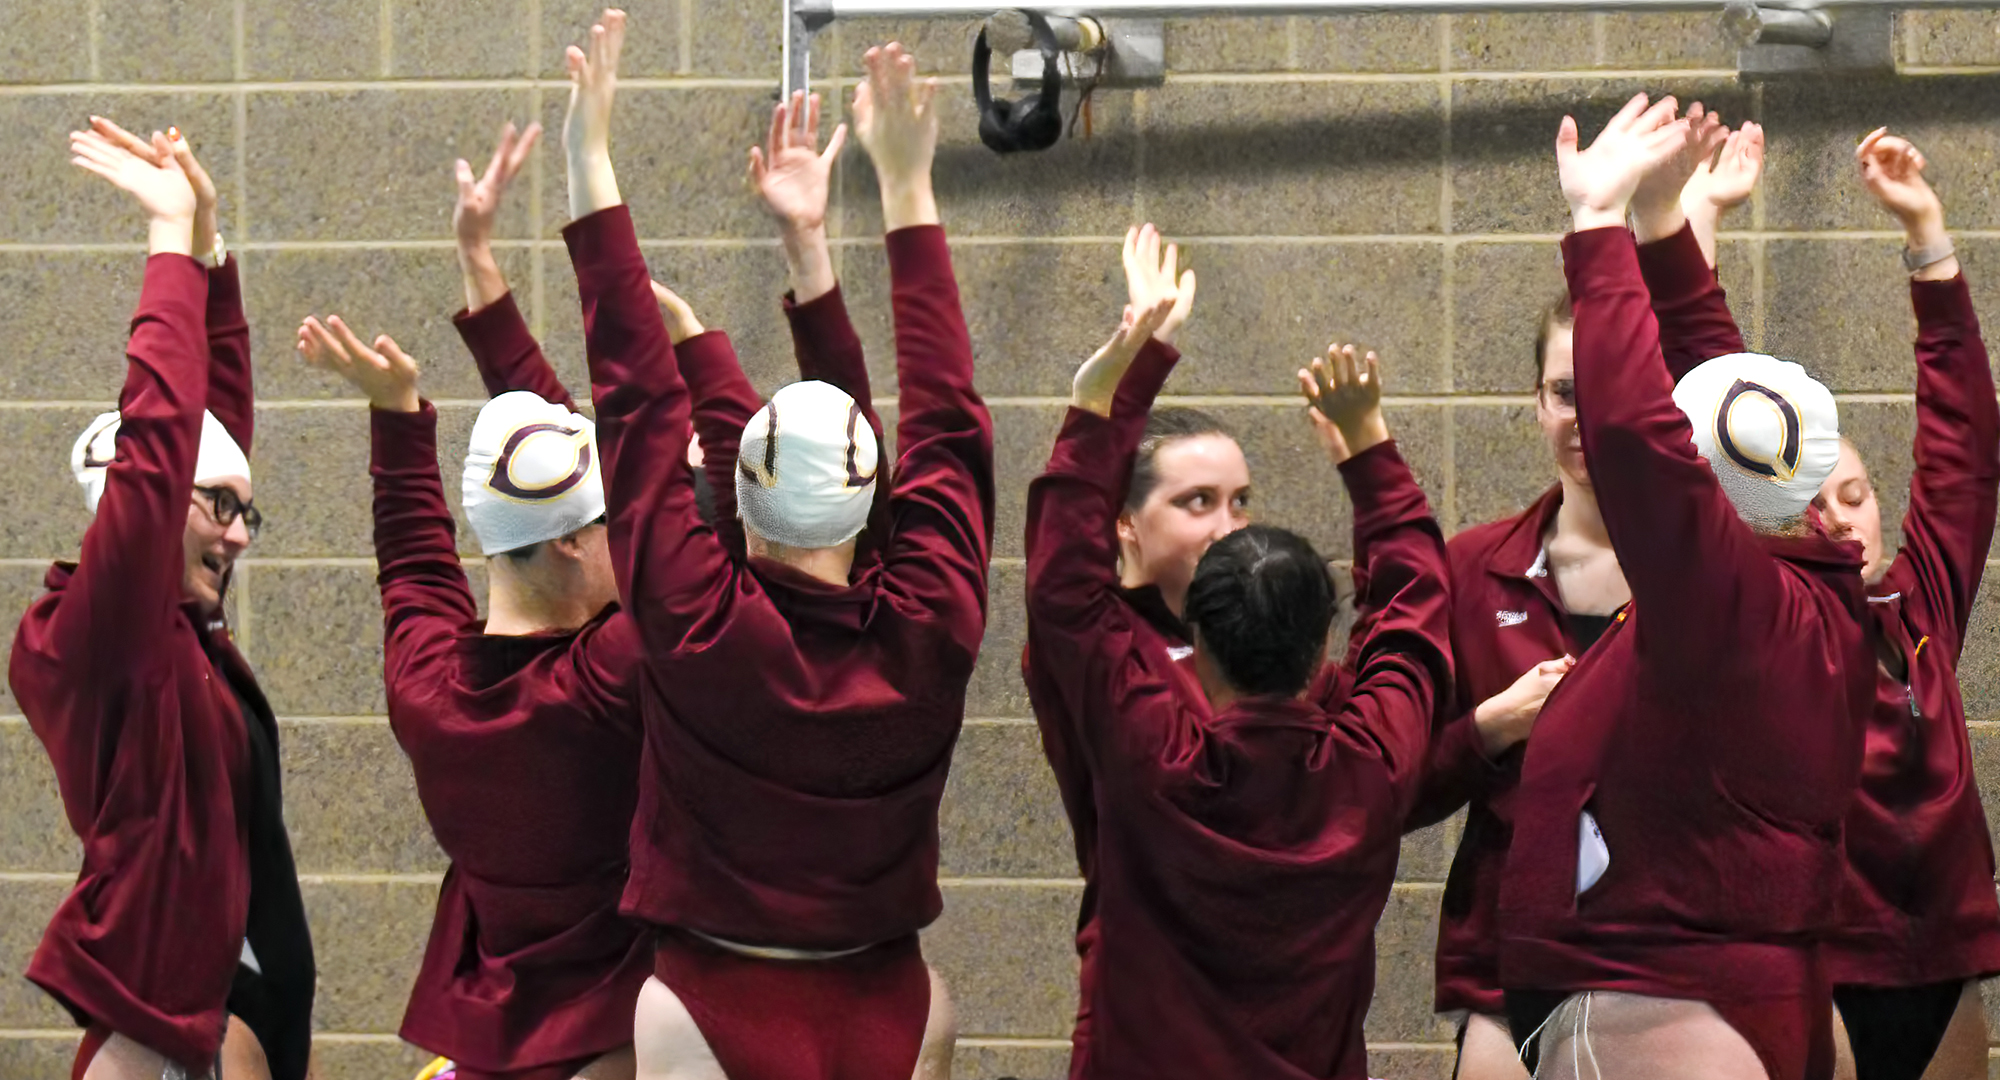 Concordia returned to competition after the holiday break, and a training trip to Florida, and fell to St. Benedict at the SJU Sprint Invite.